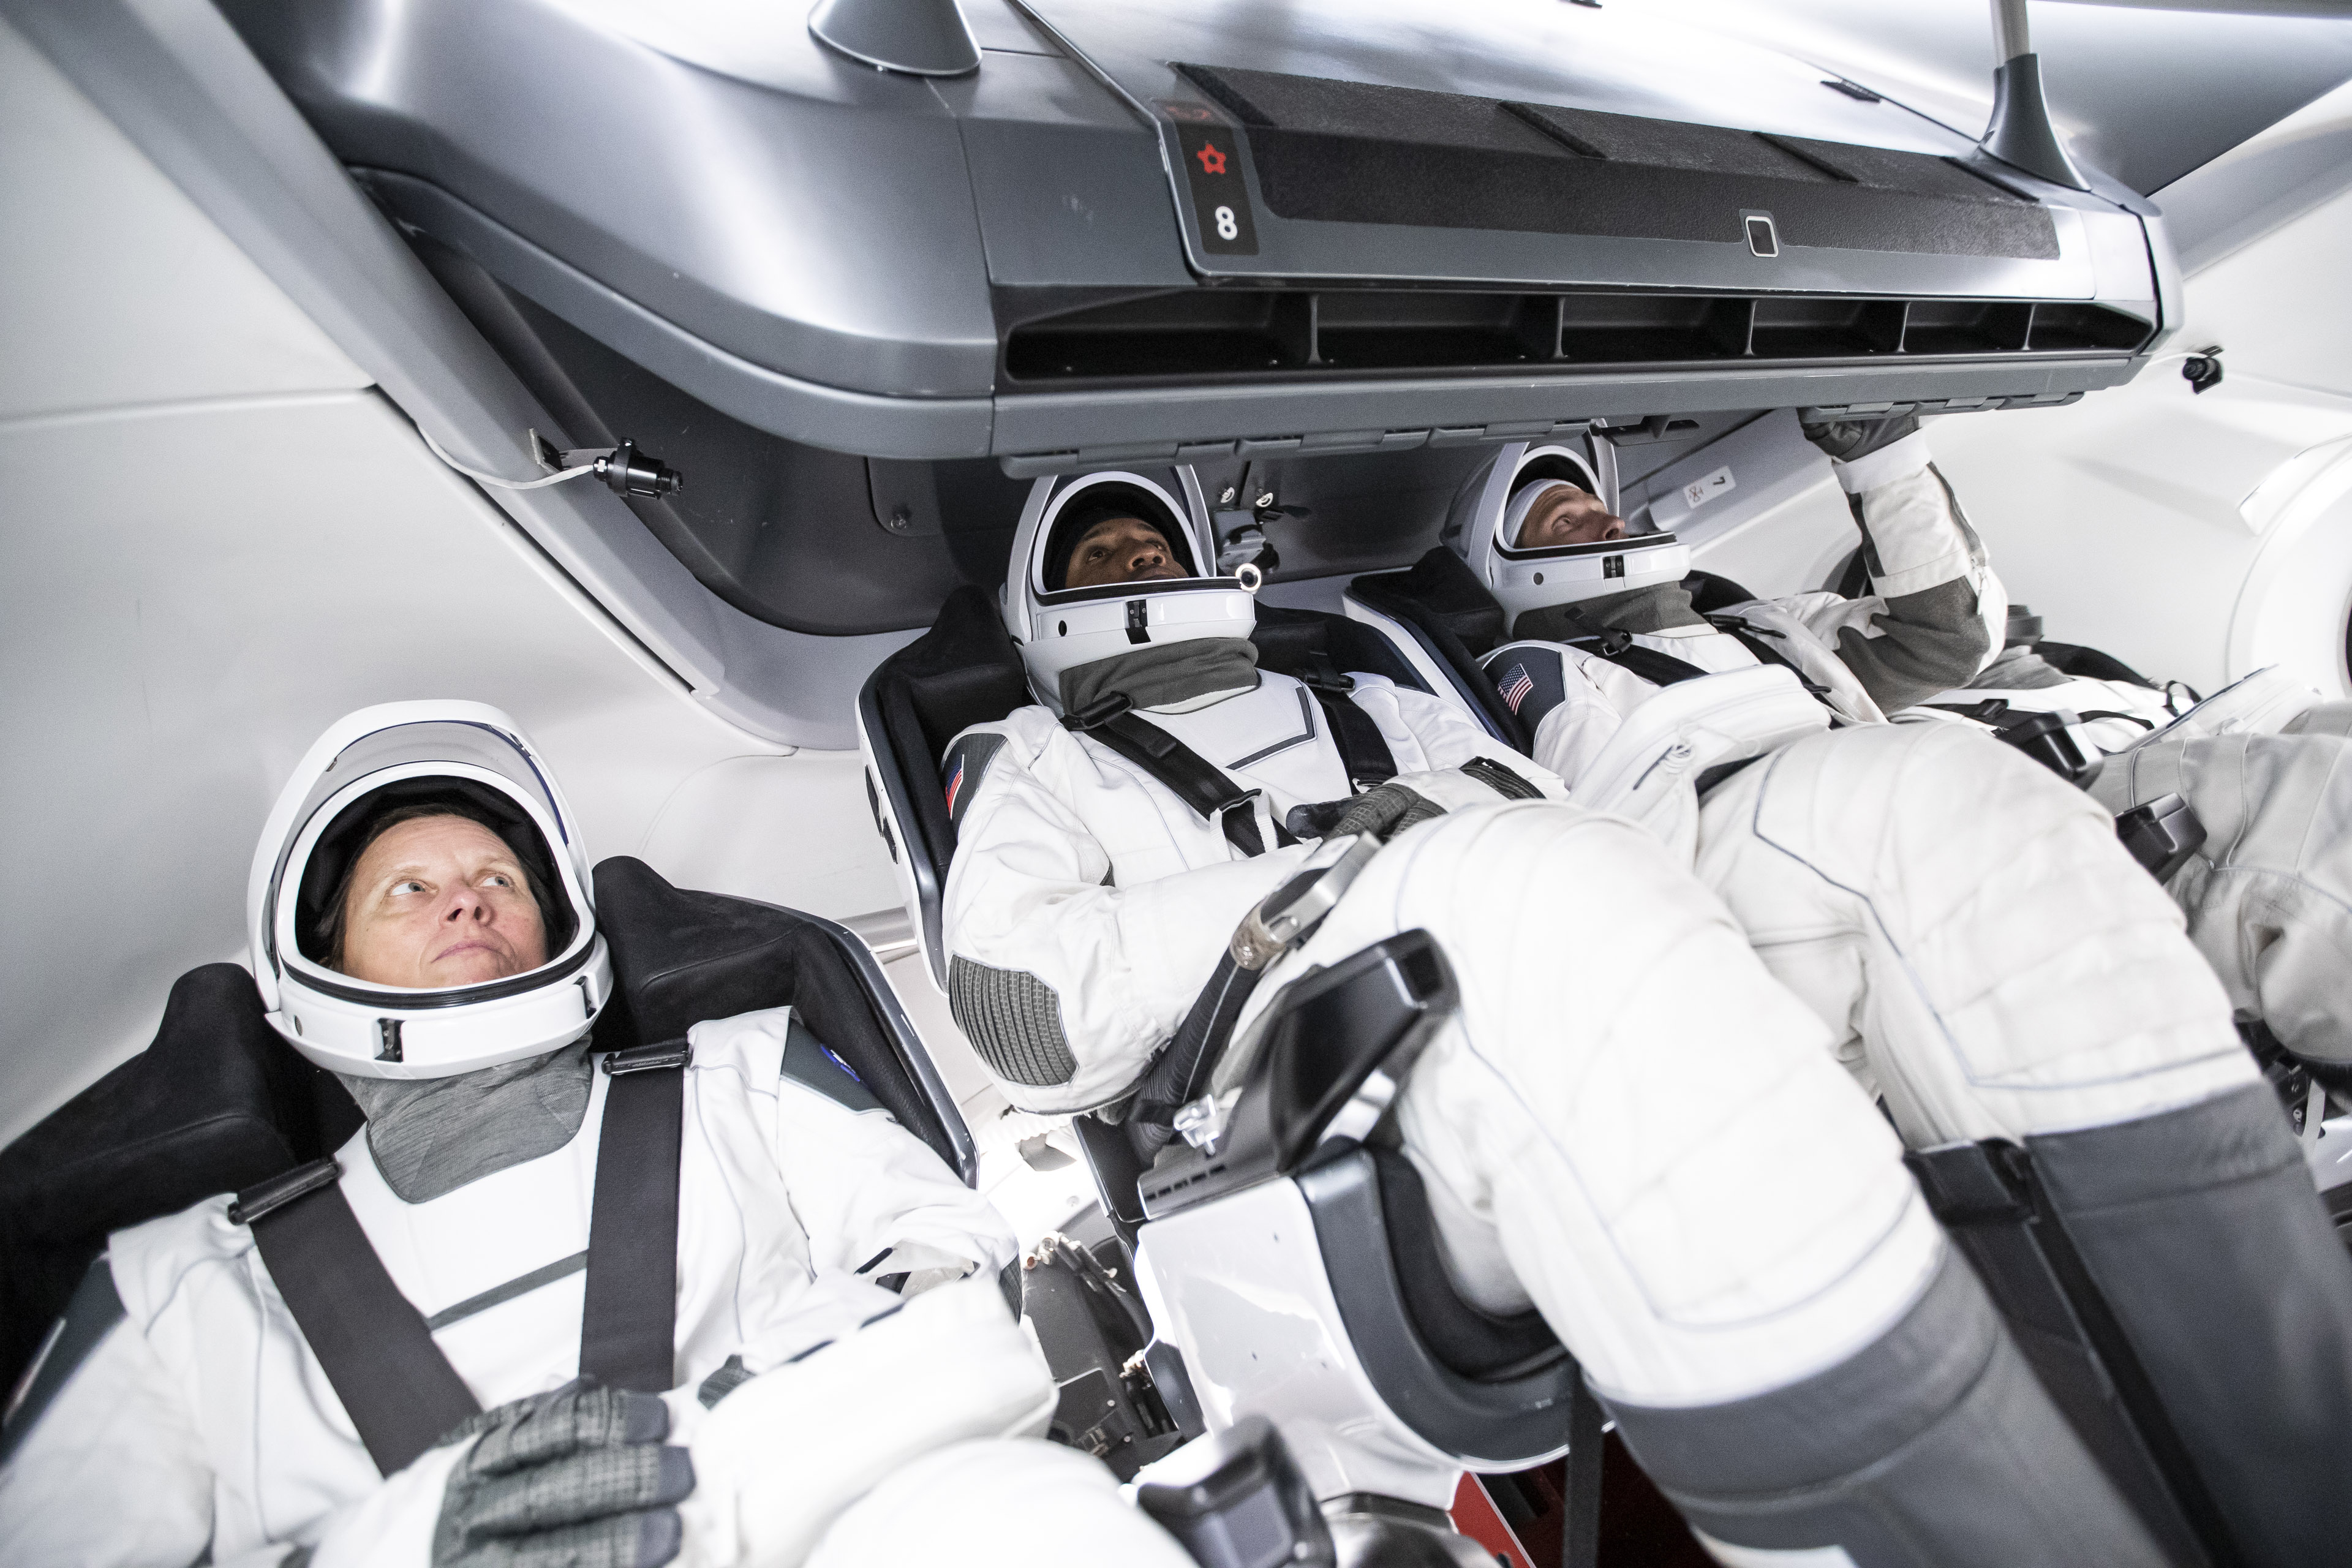 Spacex S Crew Dragon Has A New Space Toilet For Astronauts But How Does It Work Space